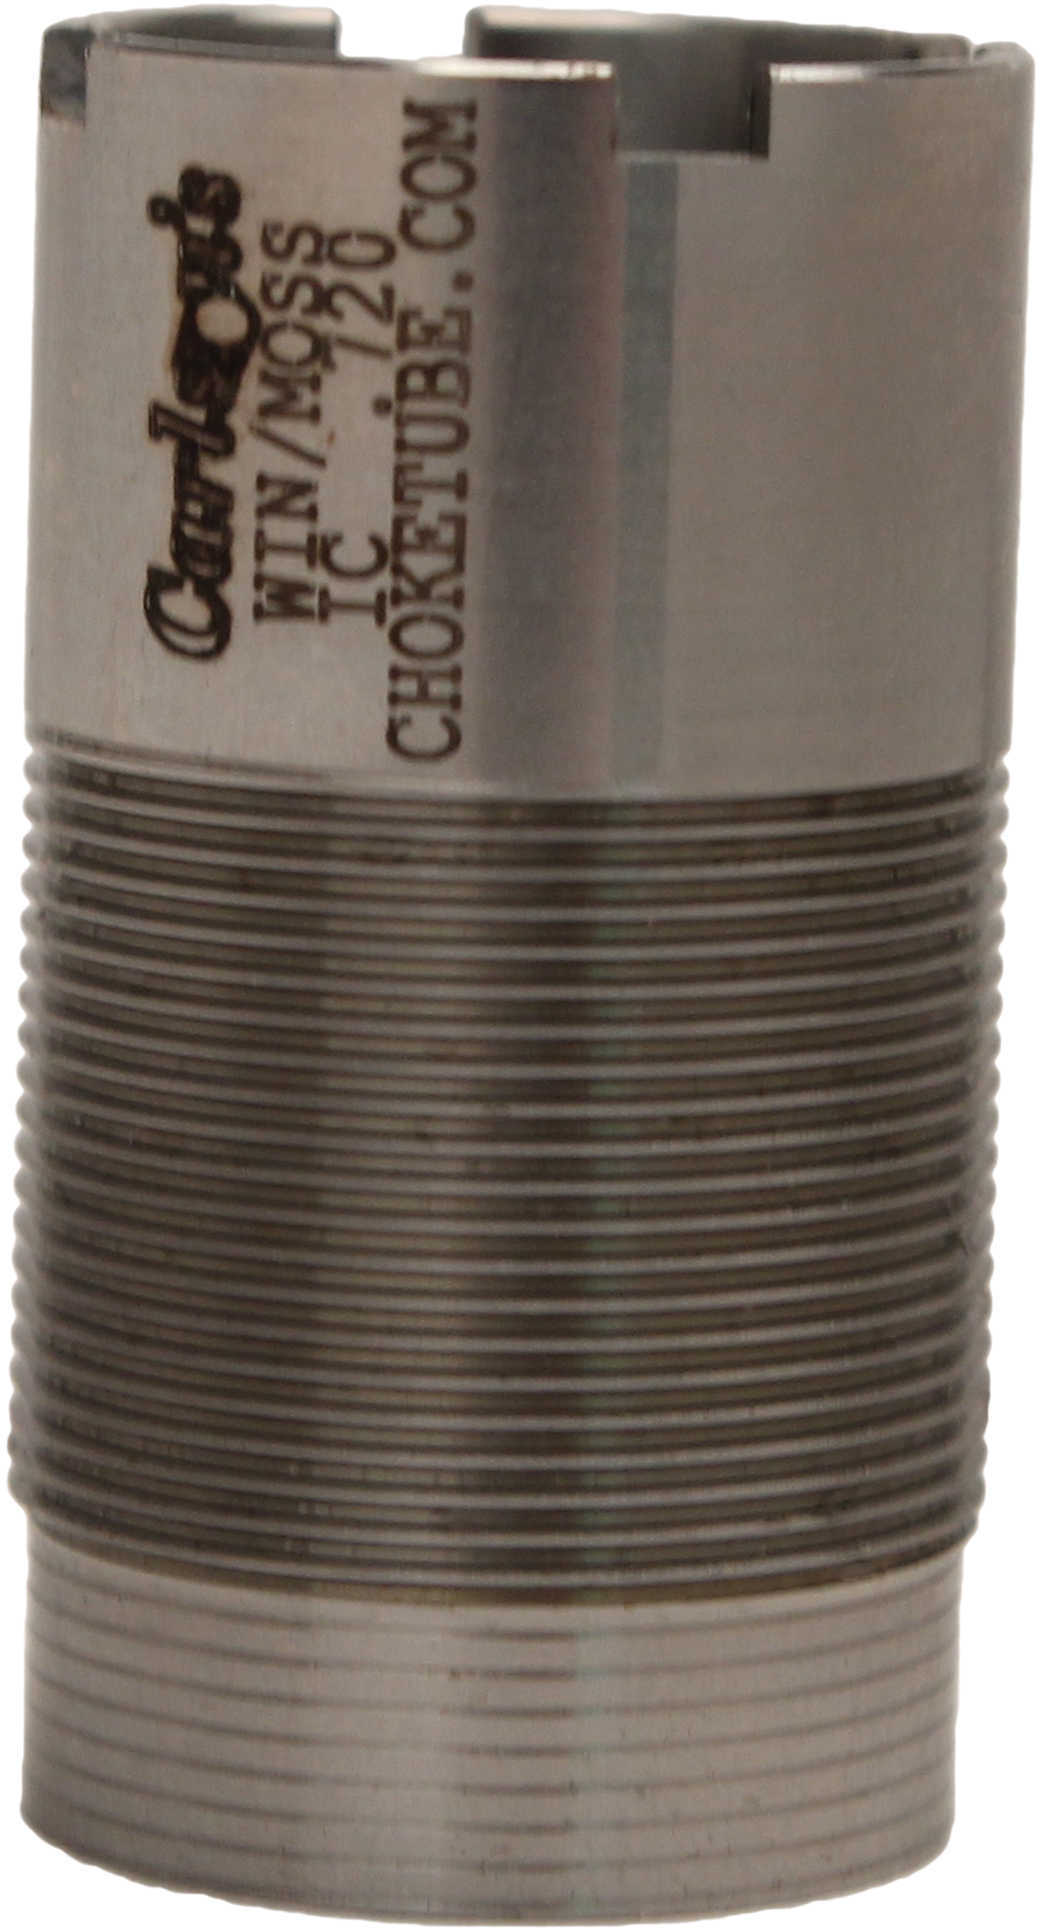 Carlson's Winchester/Mossberg 500/Browning/Weatherby Flush Mount Choke Tubes 12 Gauge, Improved Cylinder .720 Md: 12212